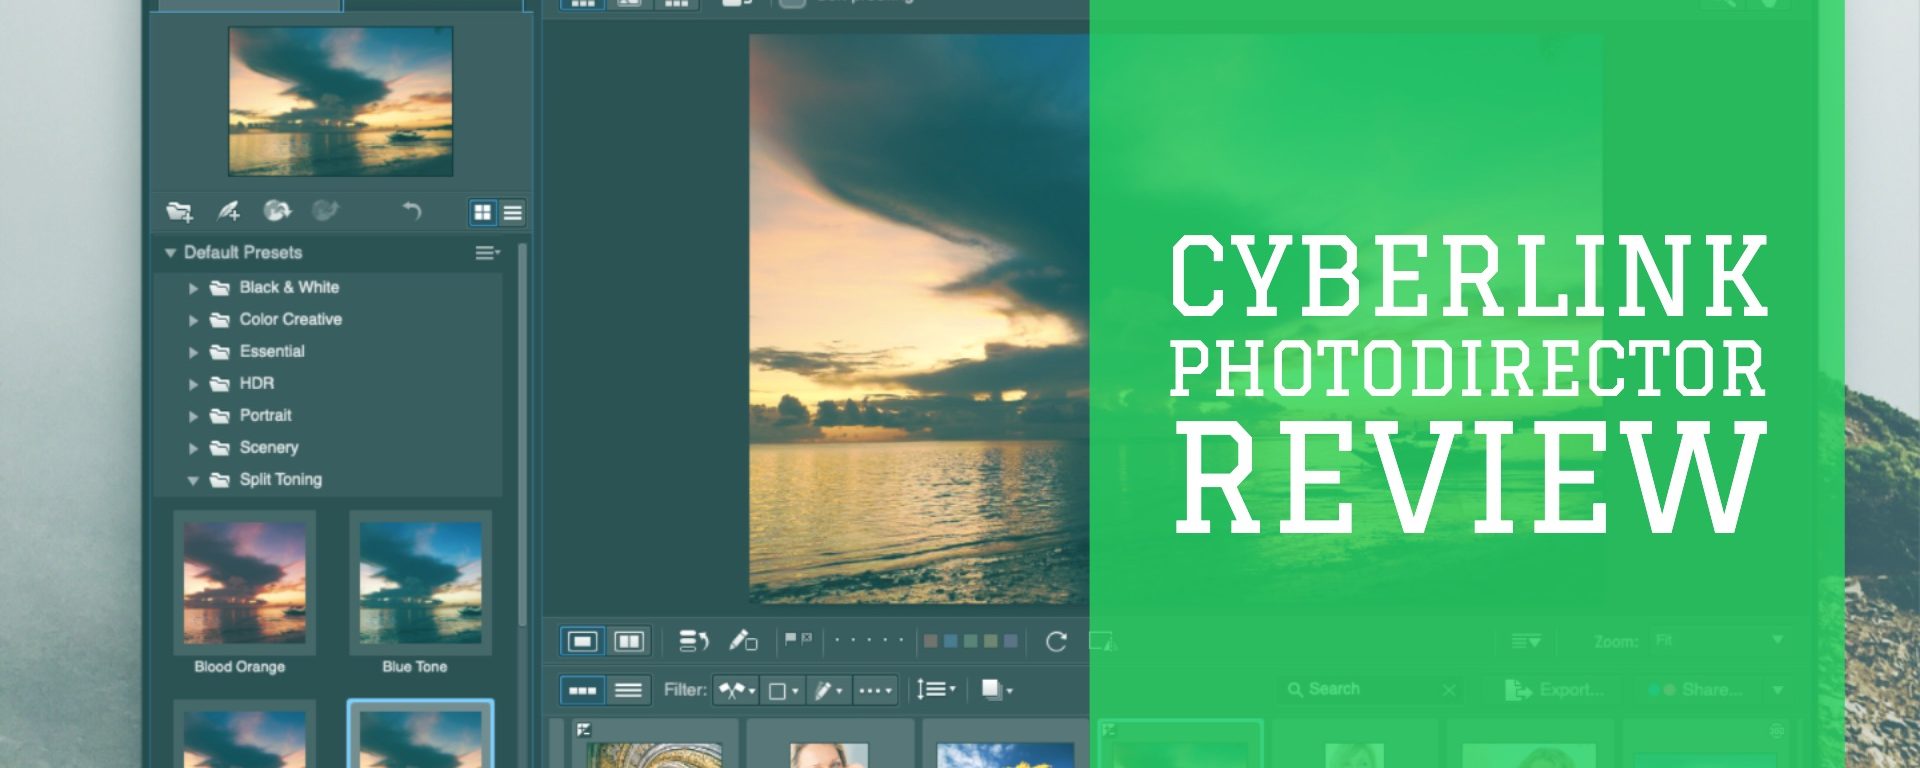 cyberlink photodirector 9 review